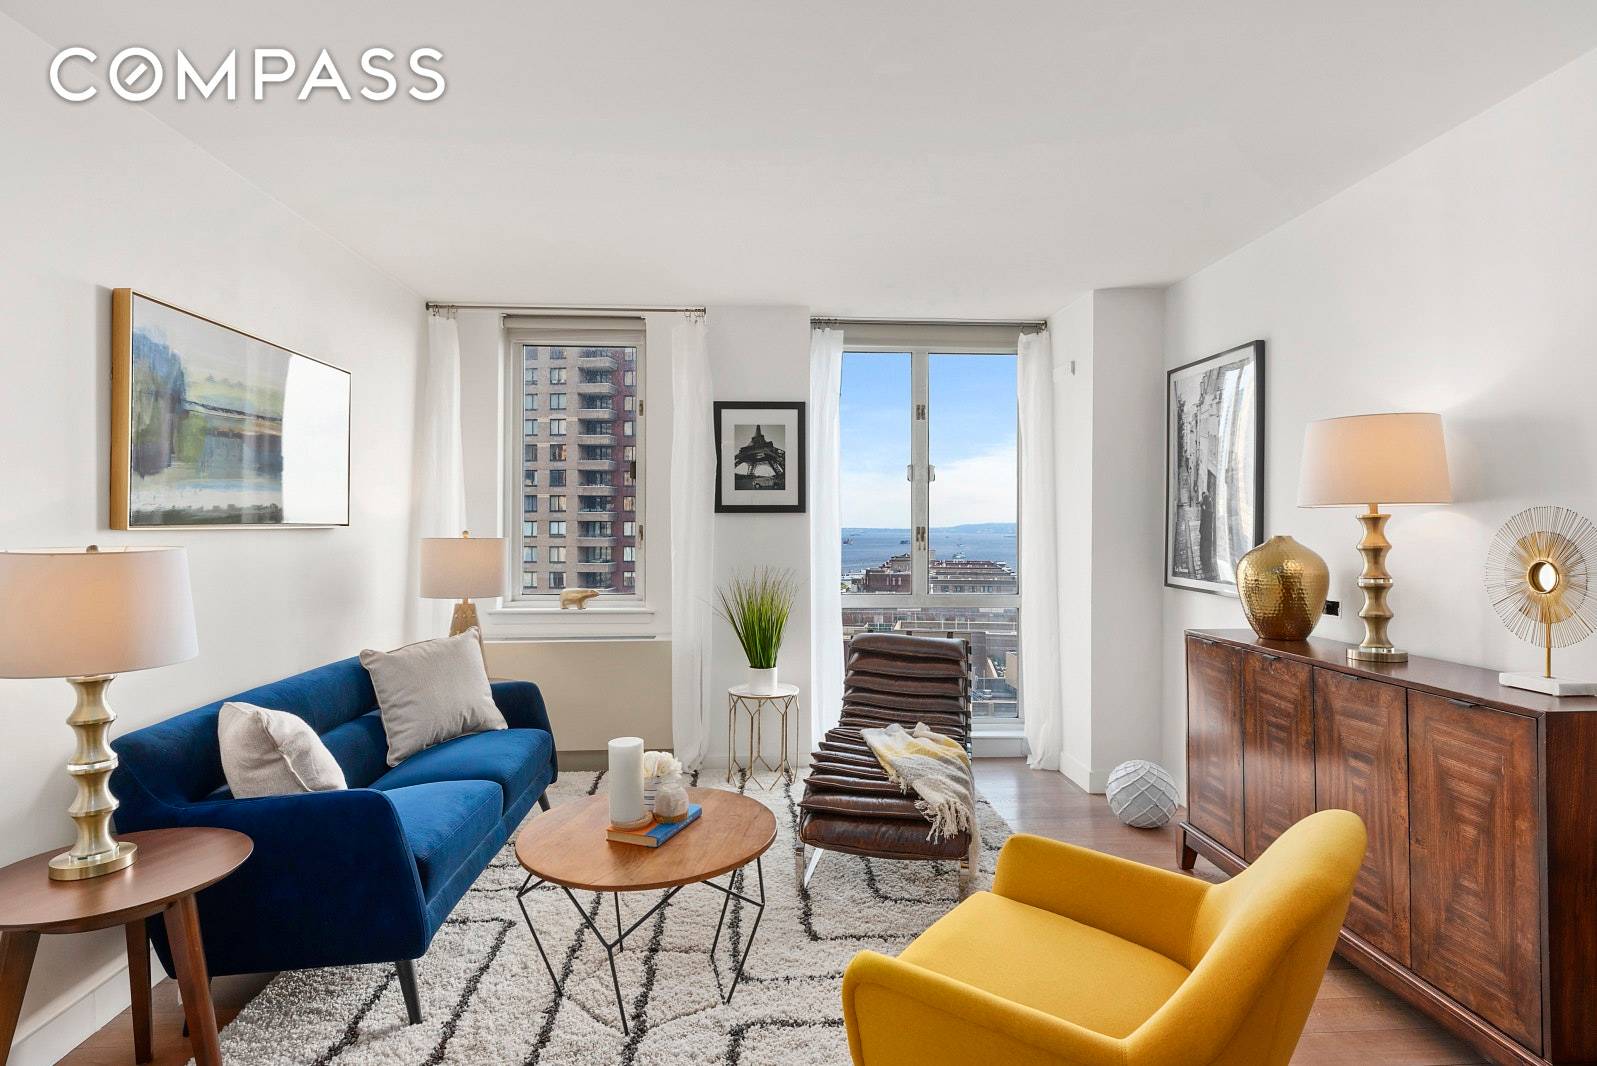 Perched atop the sixteenth floor at one of Battery Park's most sought after condominiums is a sleek, large one bedroom with majestic views of the Hudson River and Statue of ...